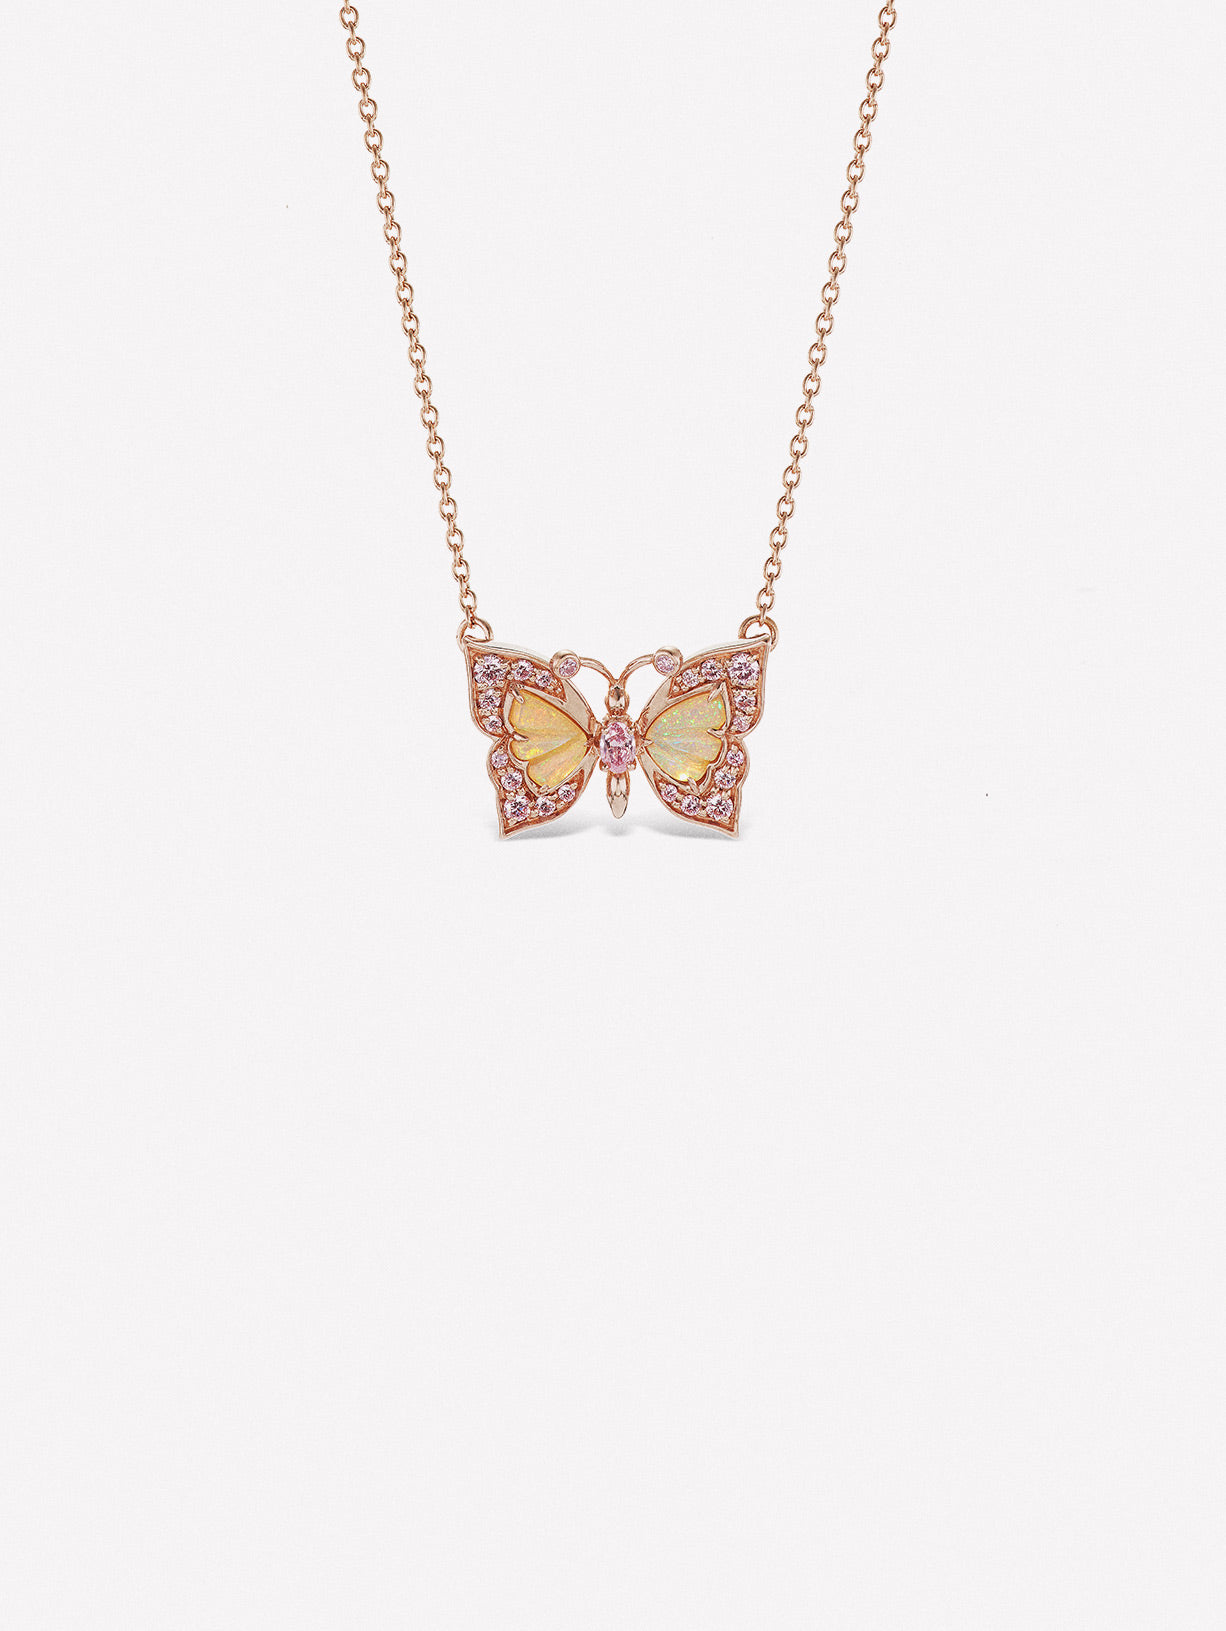 Argyle Pink™ Diamond and Opal Butterfly Necklace - Pink Diamonds, J FINE - J Fine, necklace - Pink Diamond Jewelry, argyle-pink™-diamond-and-opal-butterfly-necklace-by-j-fine - Argyle Pin